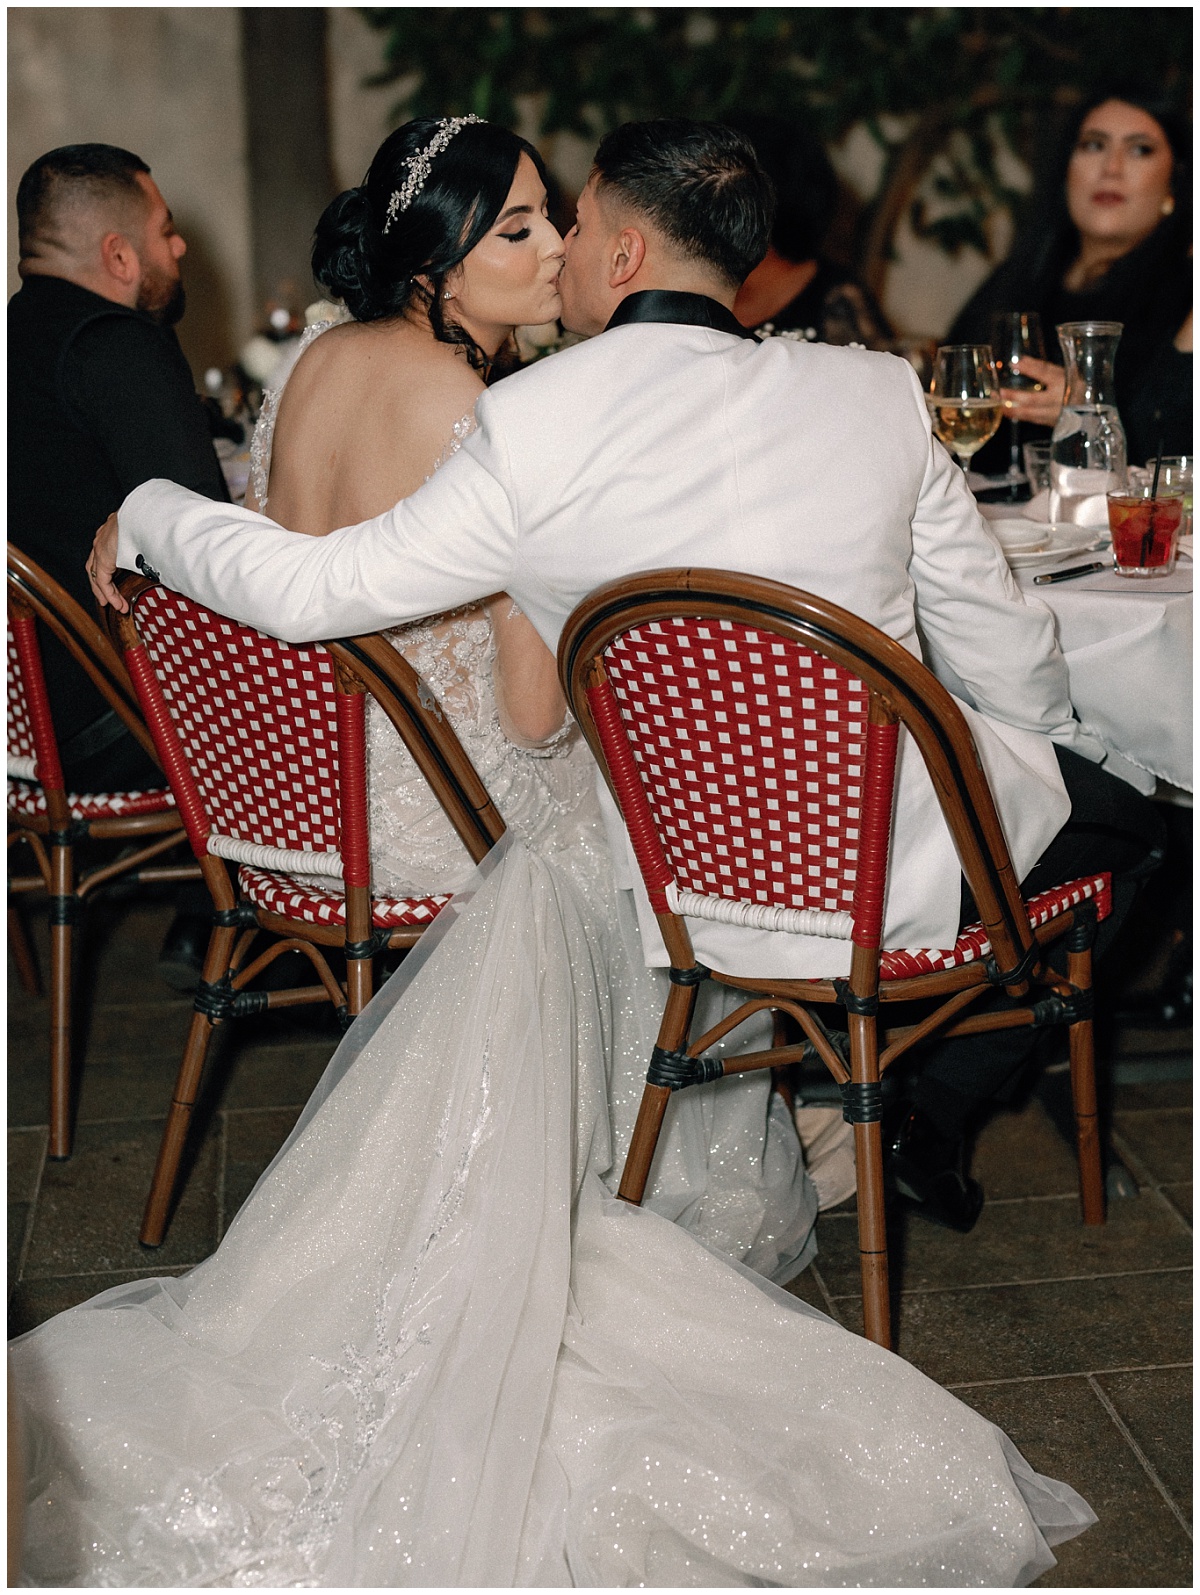 Reception Dinner Moment with Couple sharing a kiss